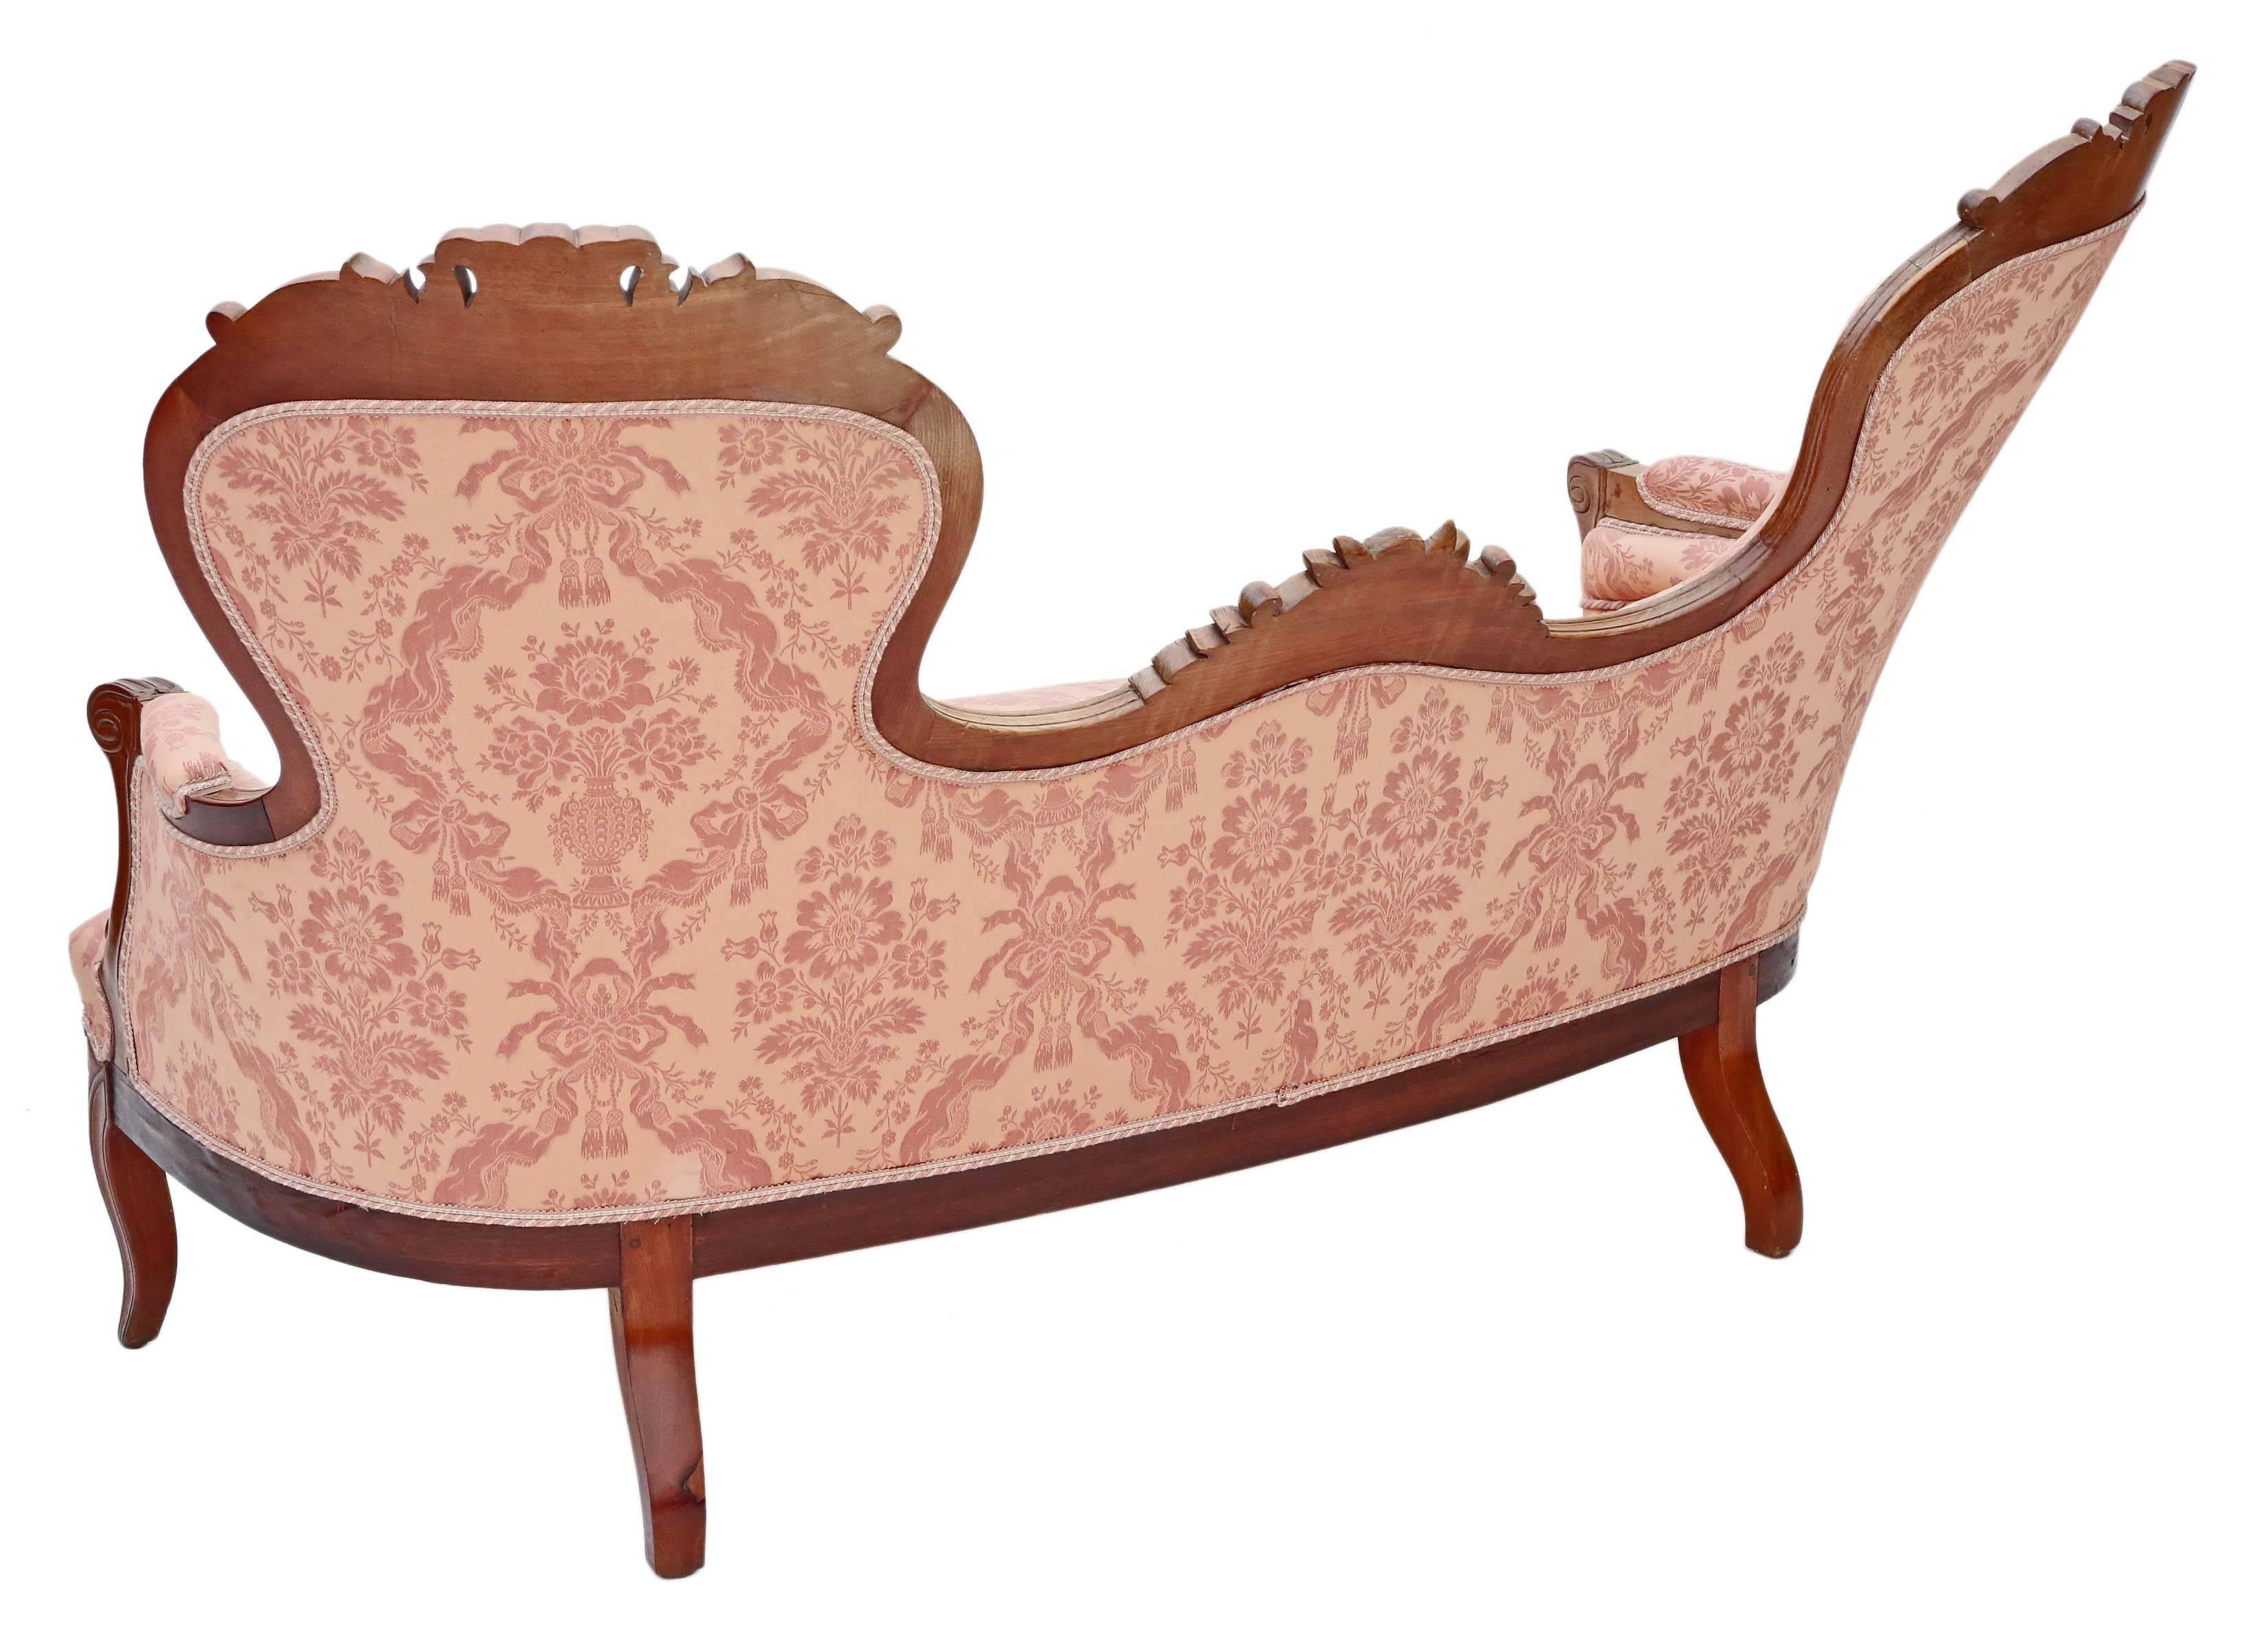 Antique Quality 19th Century Carved French Walnut Sofa Settee Chaise Longue For Sale 1